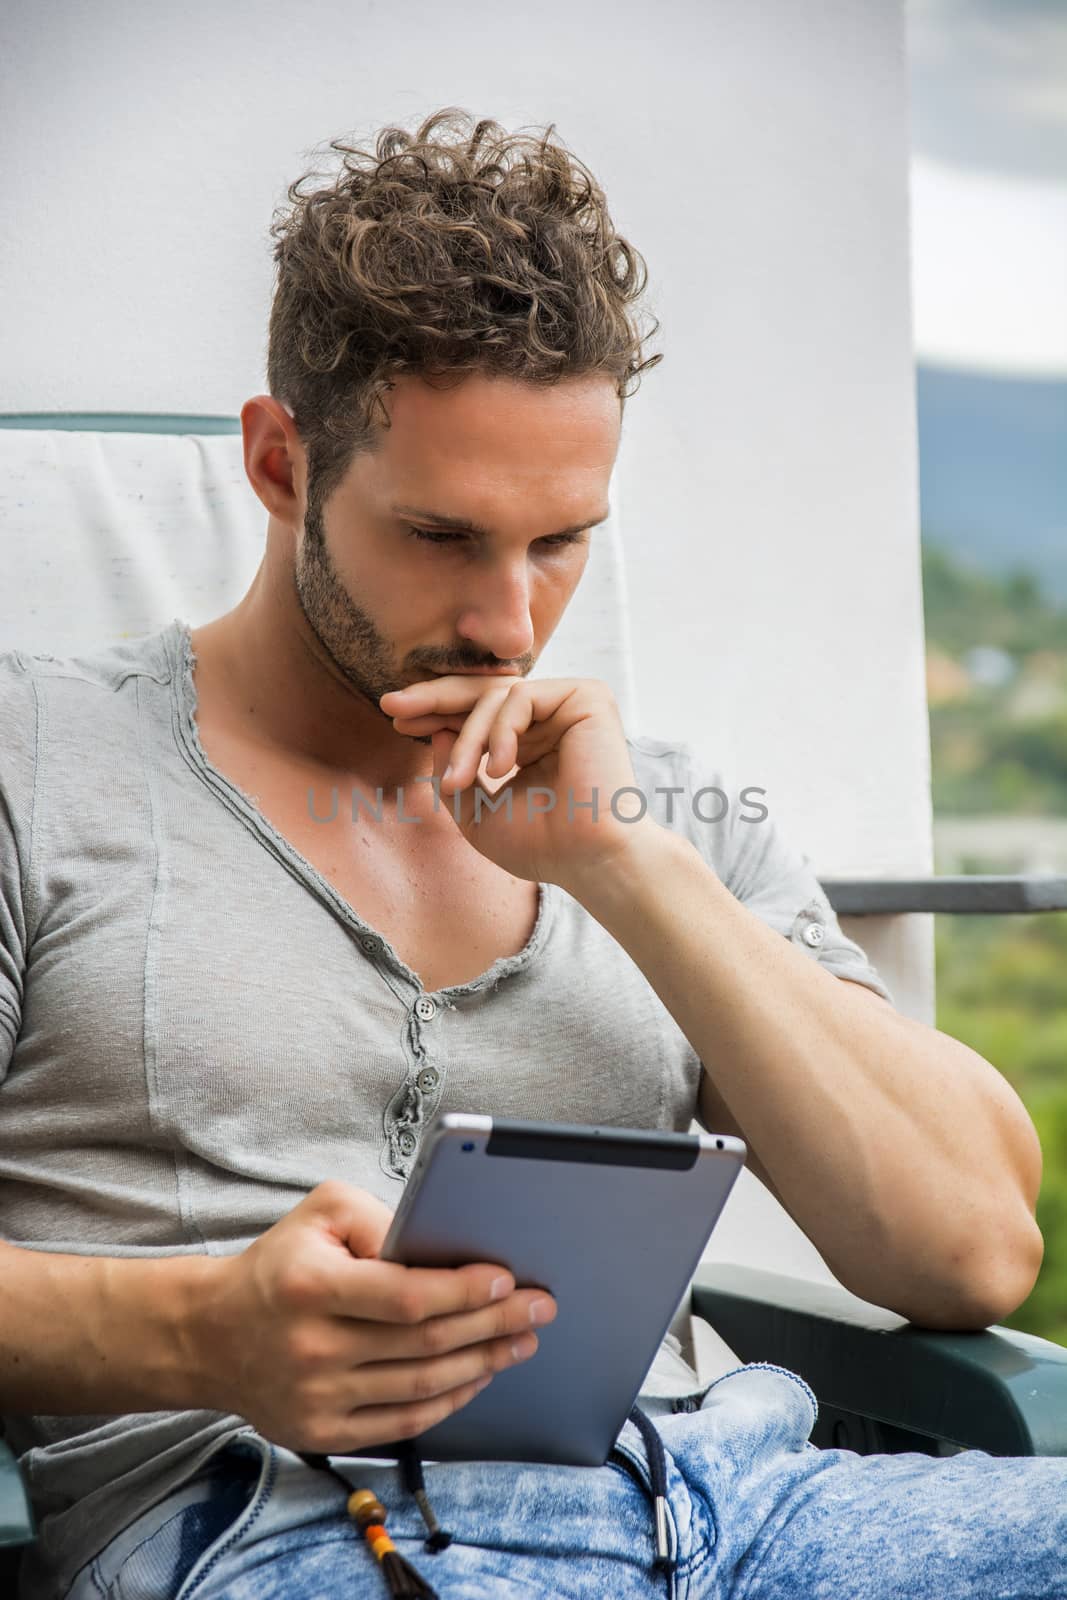 Handsome trendy man looking down at a tablet computer, outdoor by artofphoto